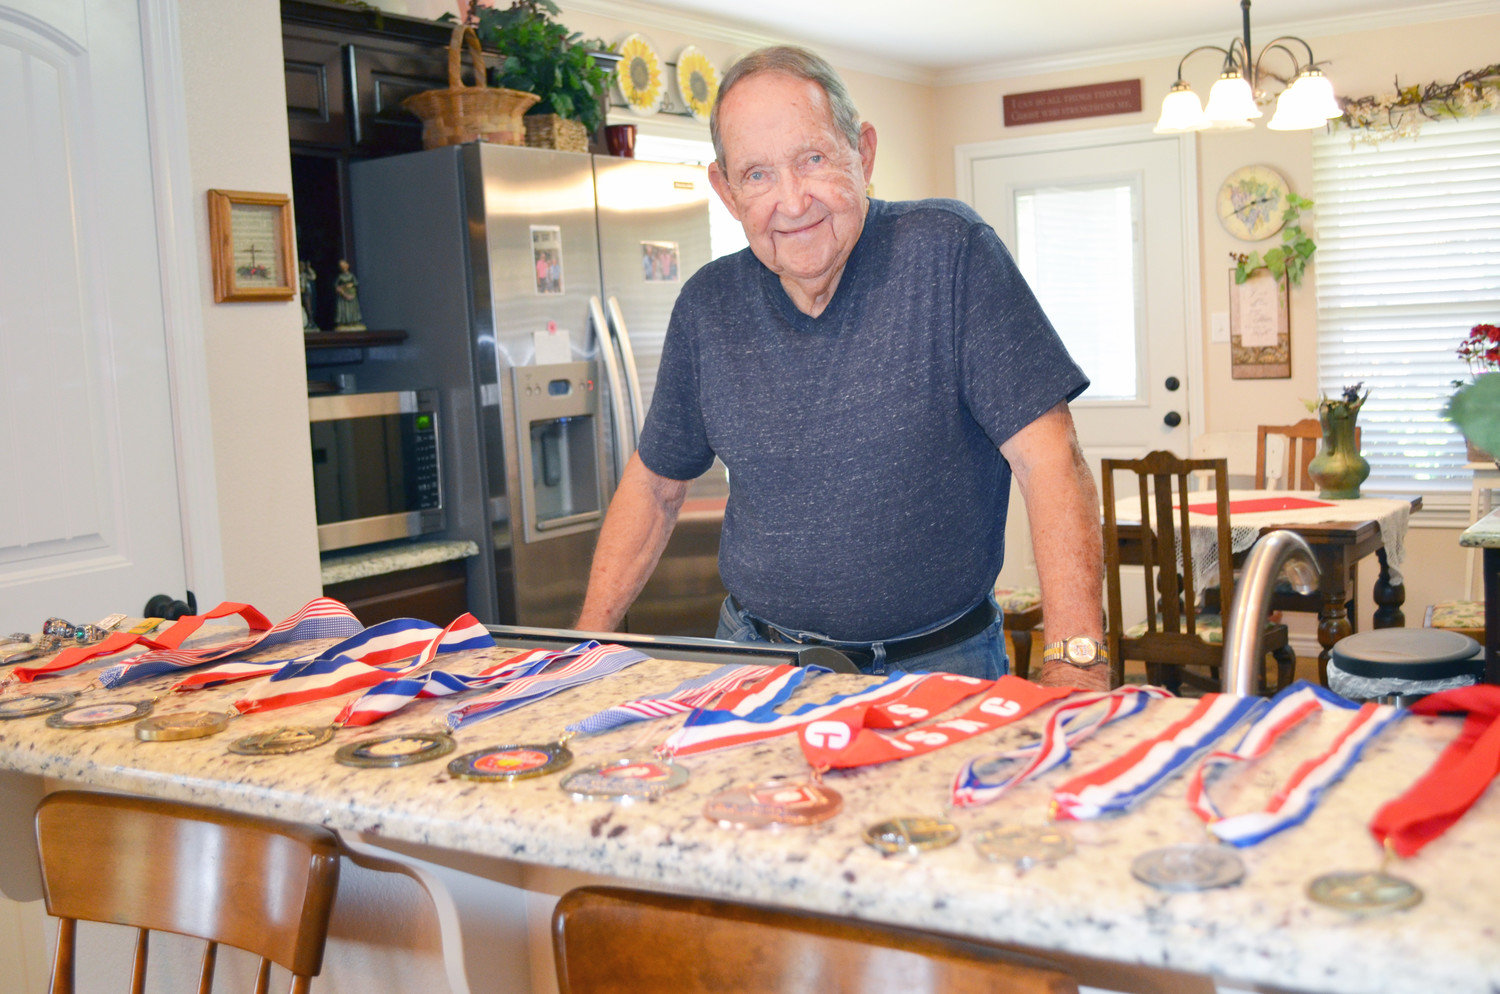 Bill Blakemore and his array of tournament medals won by senior softball teams on which he played.